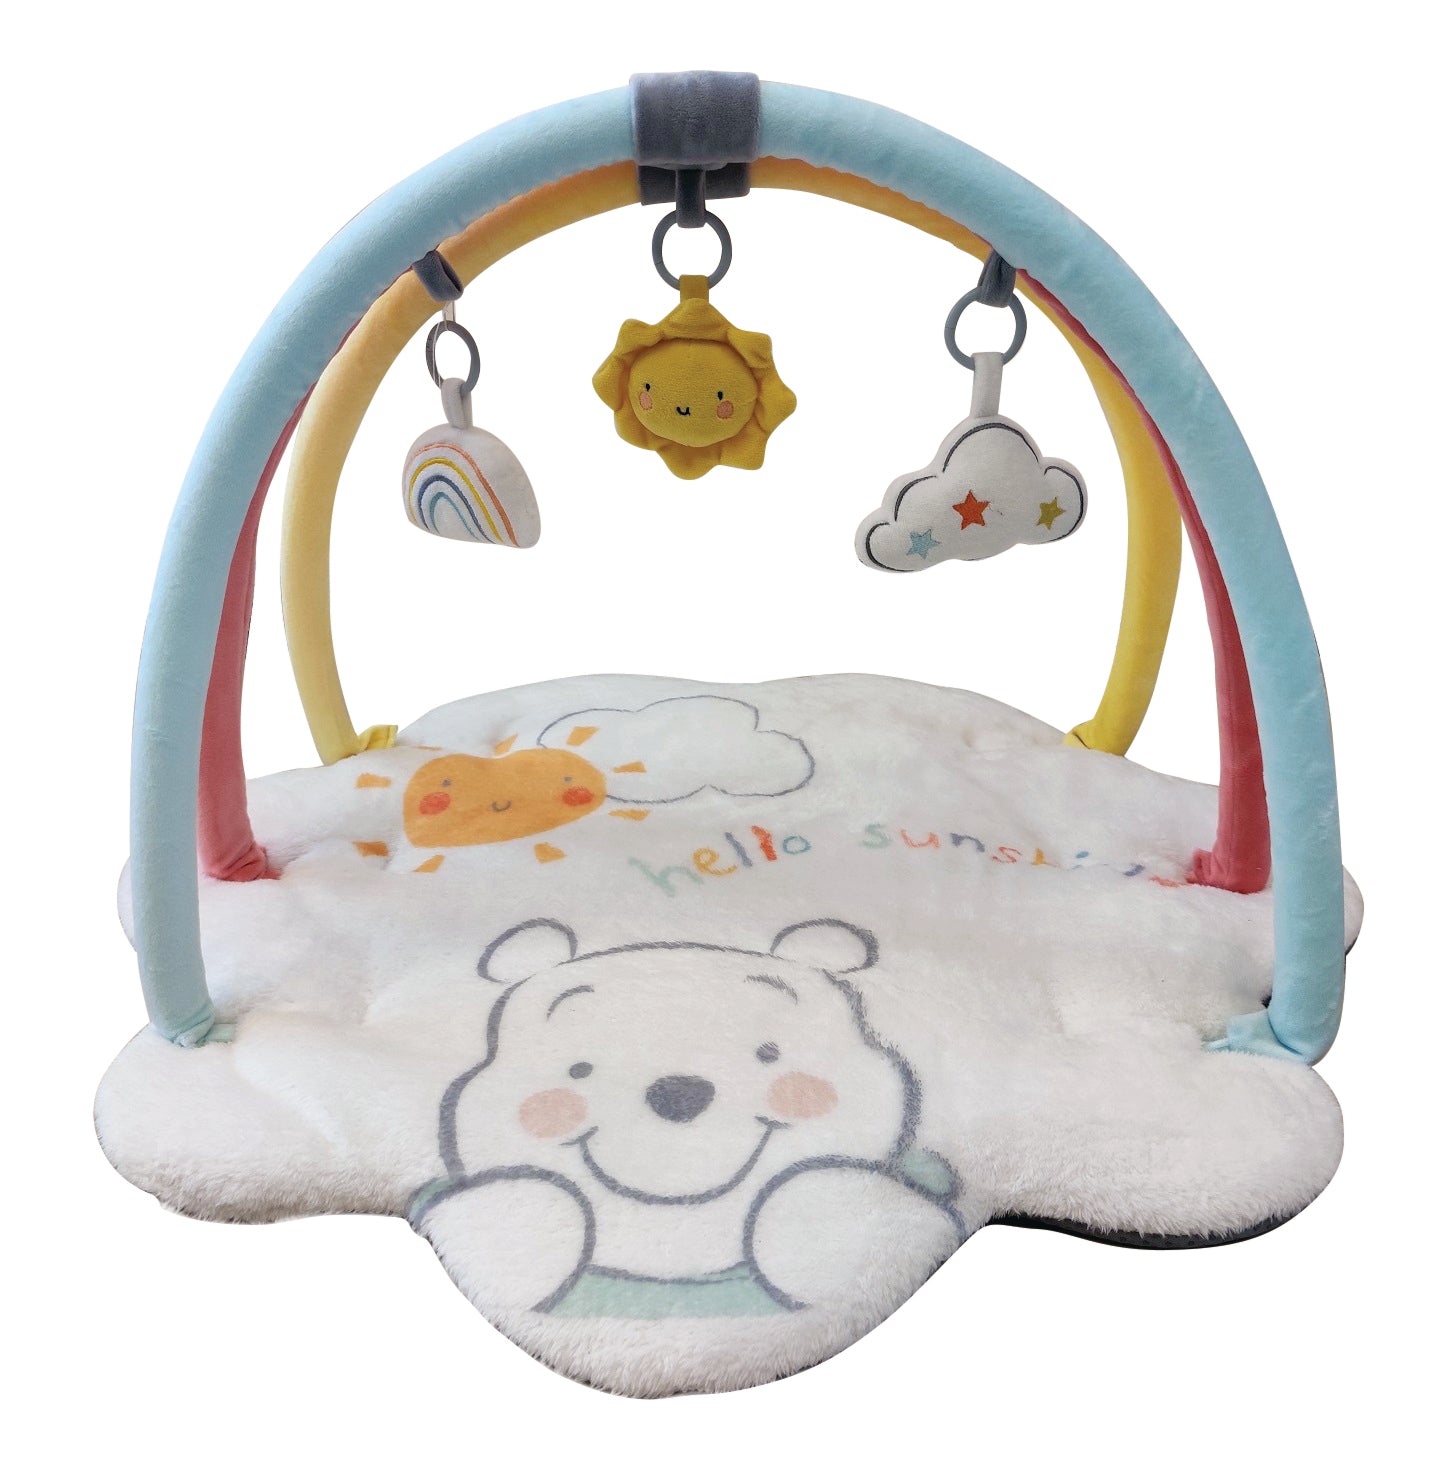 Winnie the Pooh Playmat with Toybar